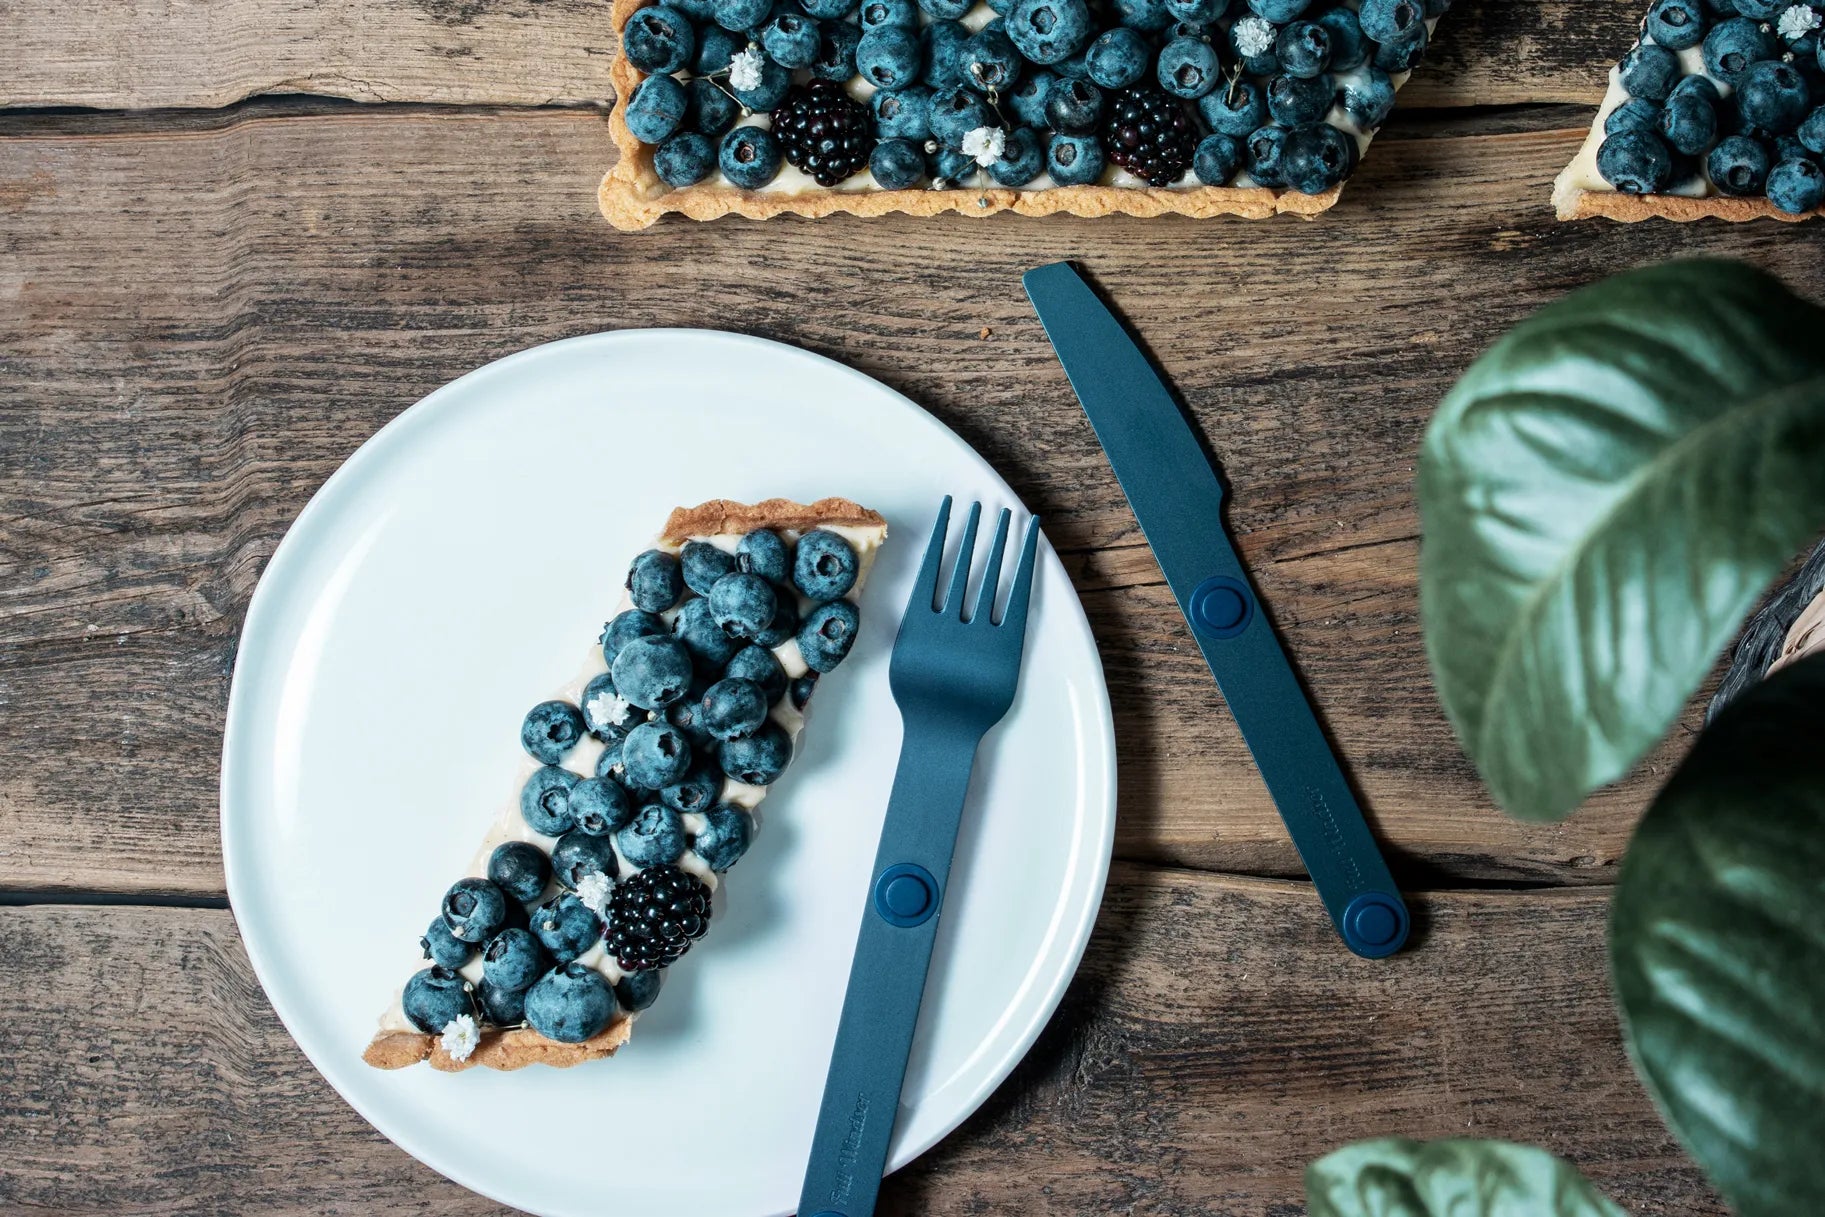 Blue fork and knife next to blueberry pie on a plate.